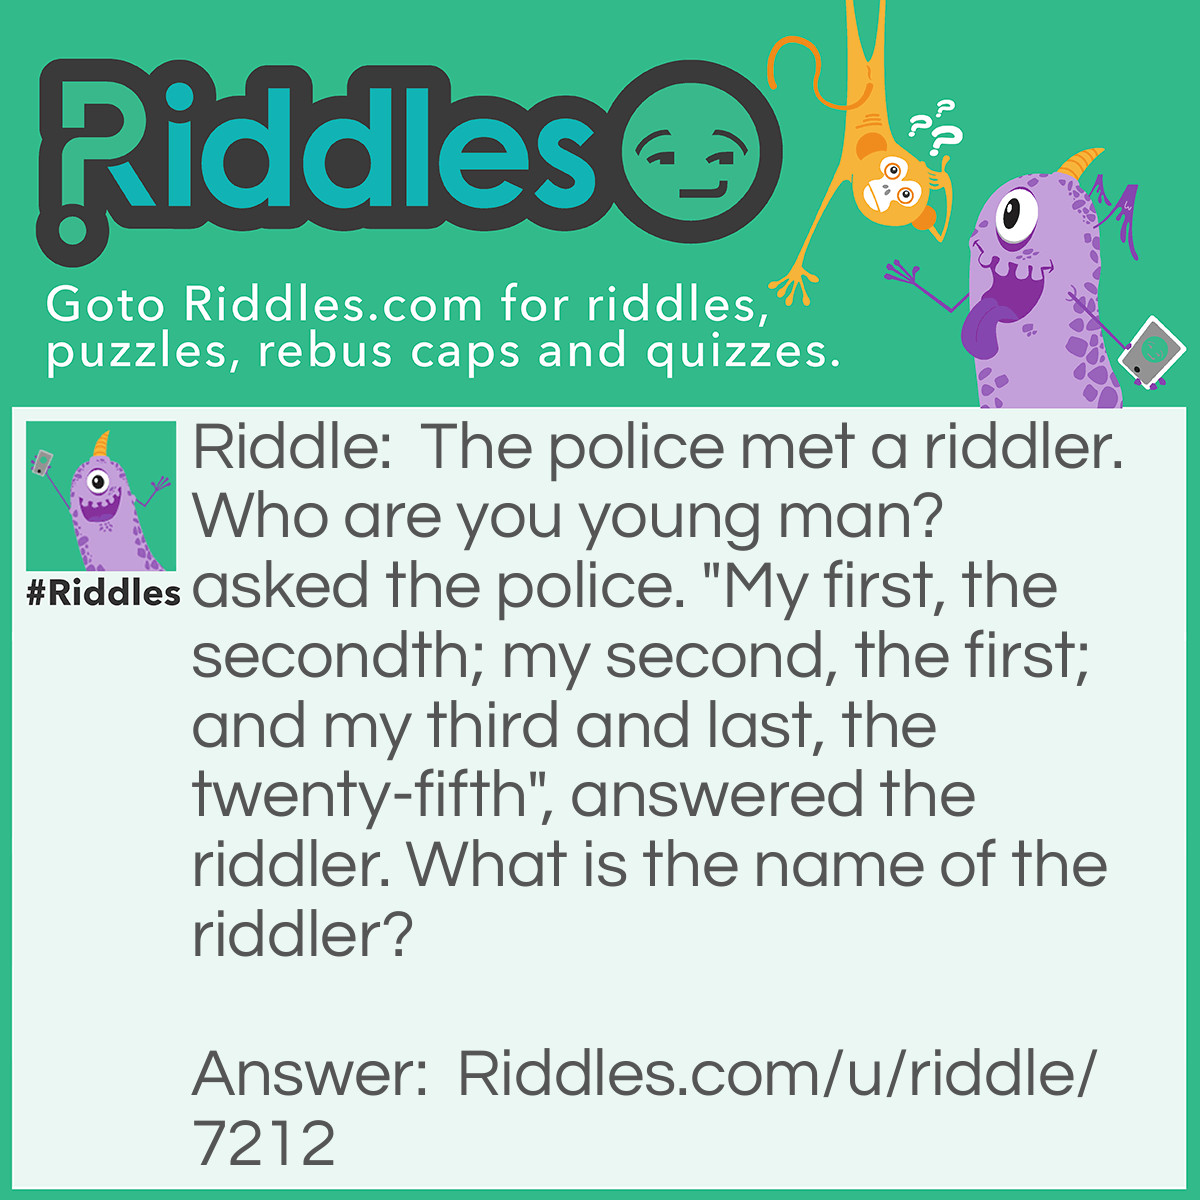 Riddle: The police met a riddler. Who are you young man? asked the police. "My first, the secondth; my second, the first; and my third and last, the twenty-fifth", answered the riddler. What is the name of the riddler? Answer: The riddler's name is BAY. (Using the English alphabet)